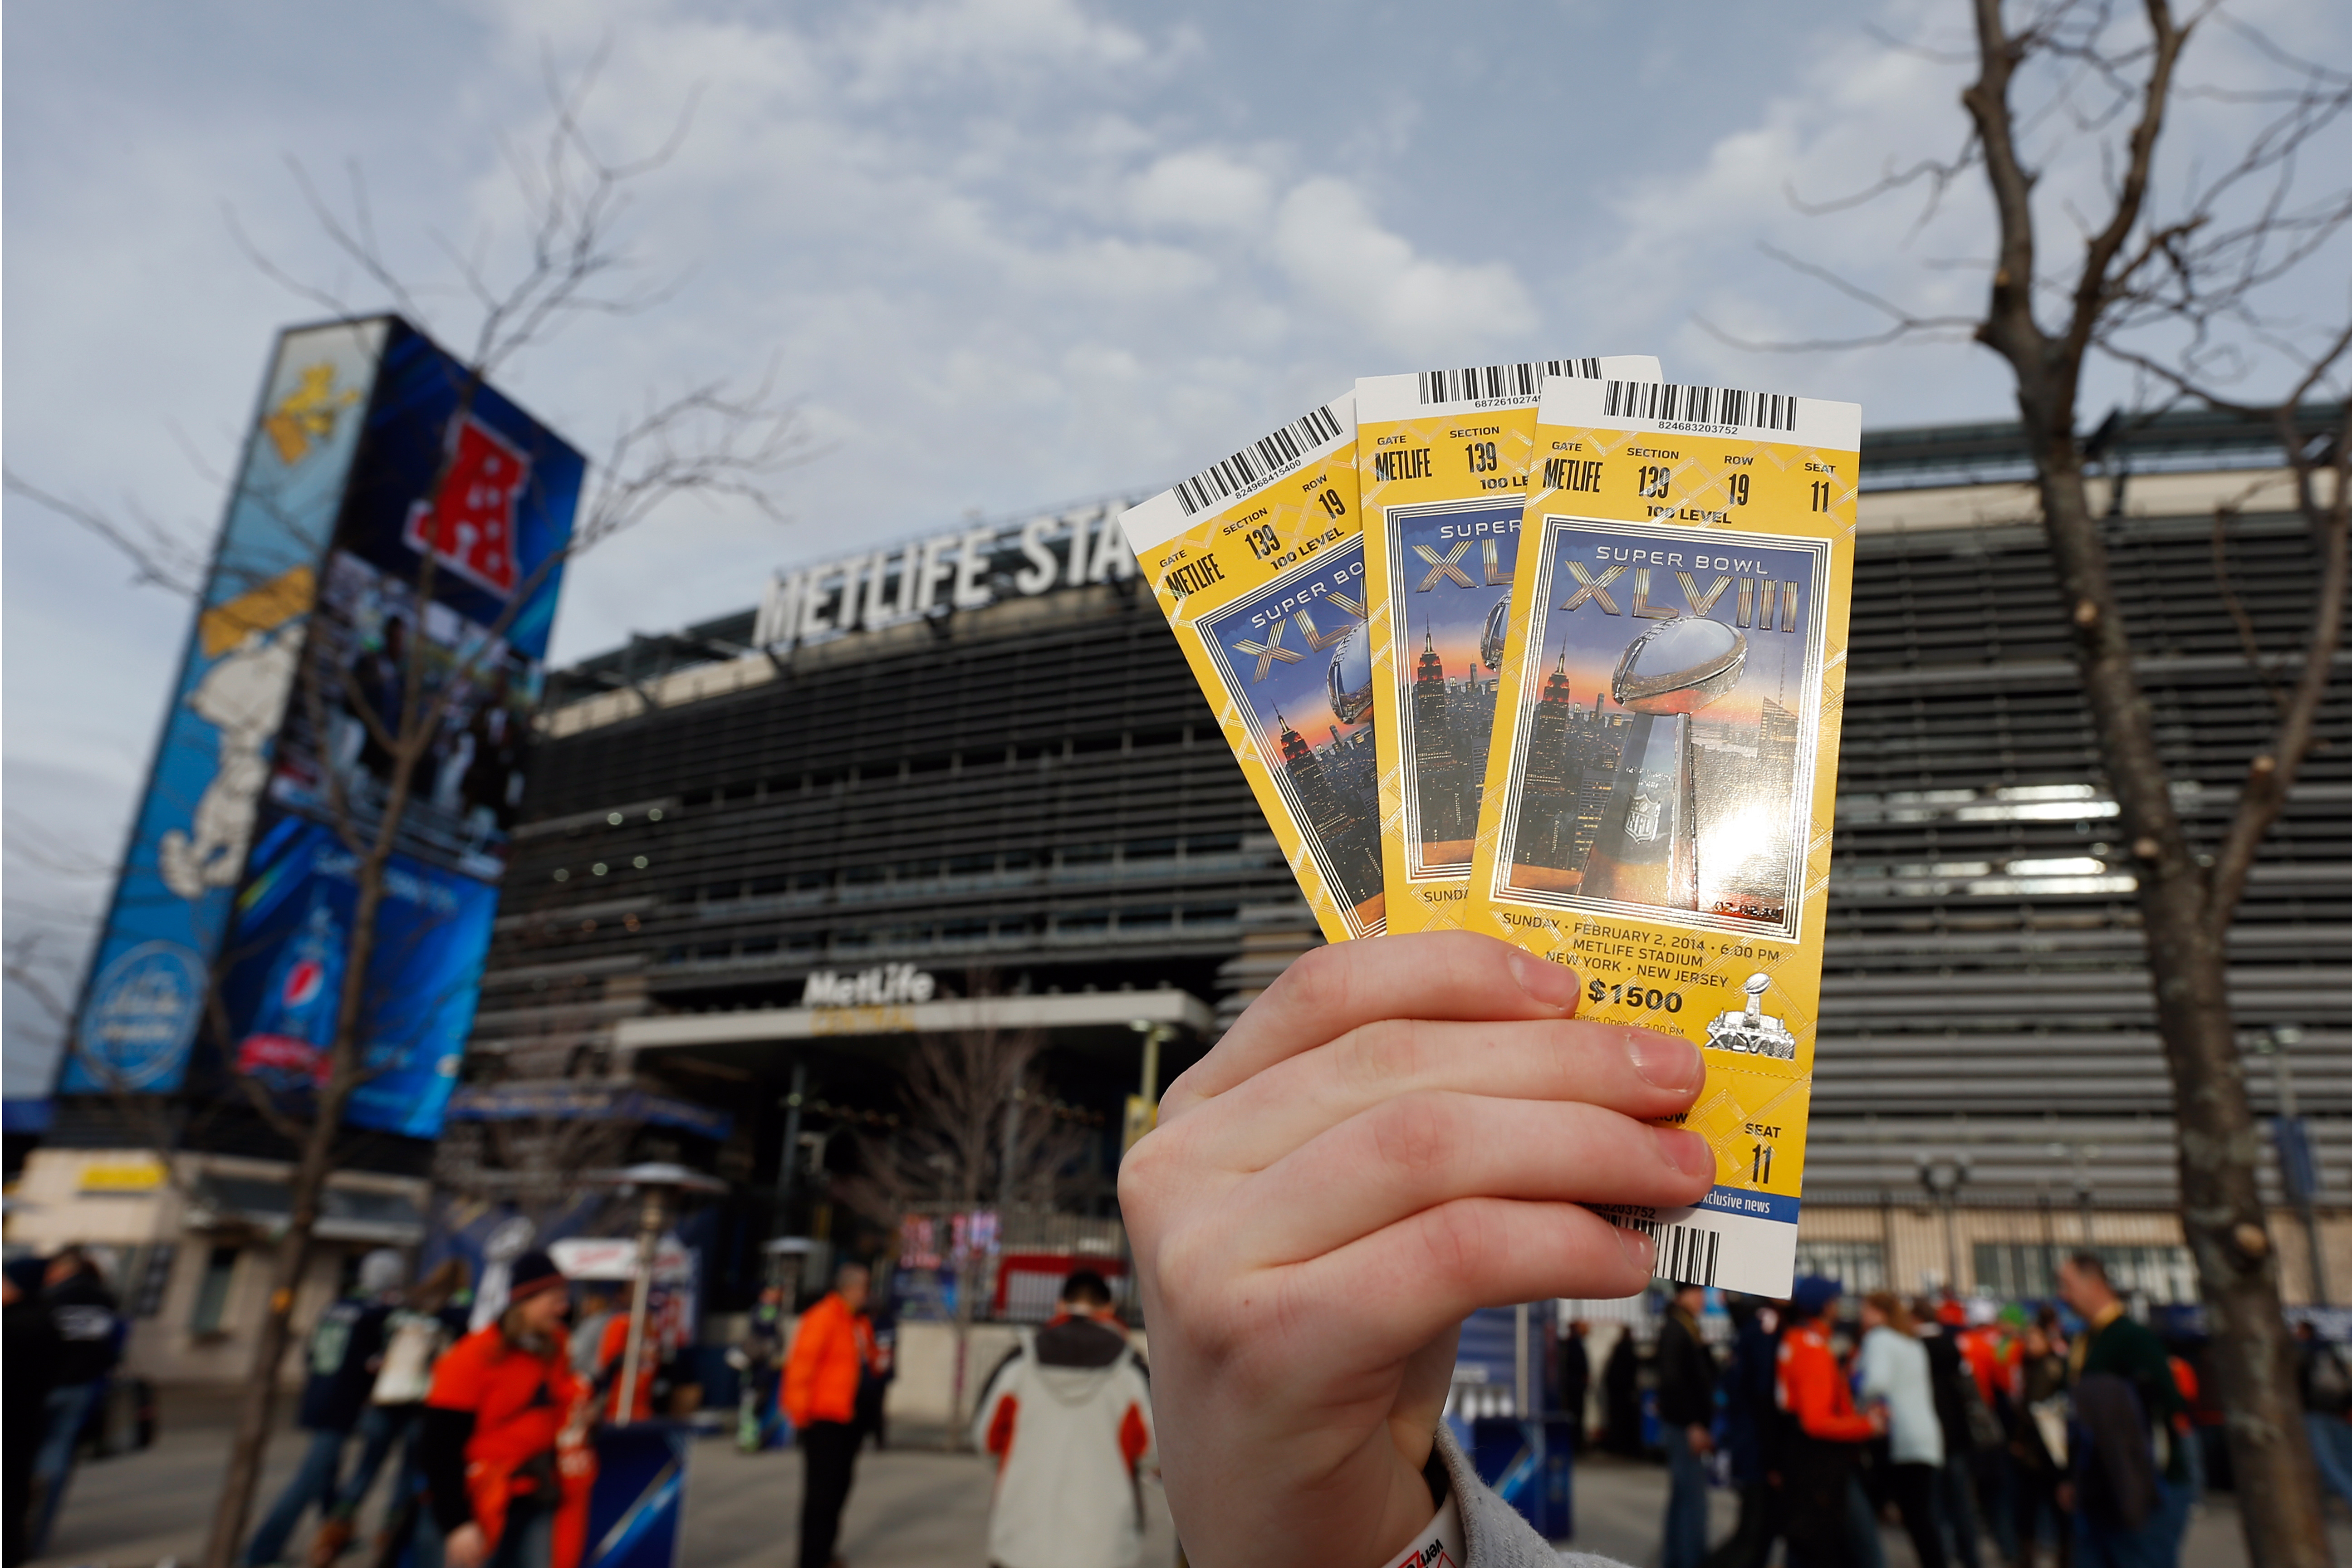 A general view of the exterior of MetLife Stadium as a fan holds his Super Bowl XLVIII ticket prior to the Super Bowl XLVIII game between the Seattle Seahawks against the Denver Broncos in East Rutherford, New Jersey on Sunday, February 2, 2014. The Seahawks defeated the Broncos 43-8.